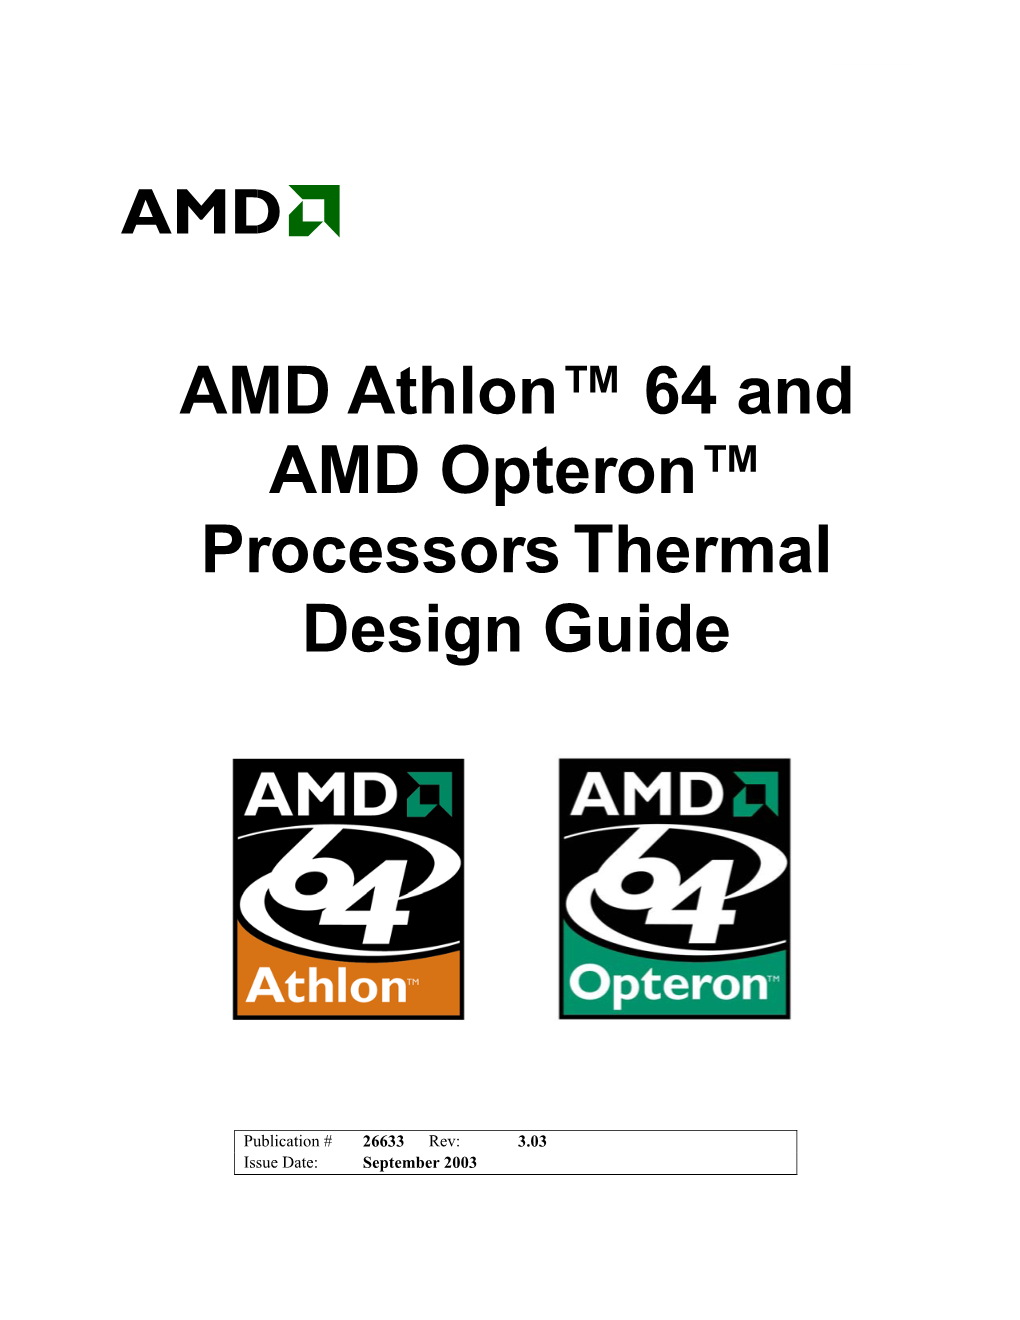 AMD Athlon™ 64 and AMD Opteron™ Processors Thermal Design Guide